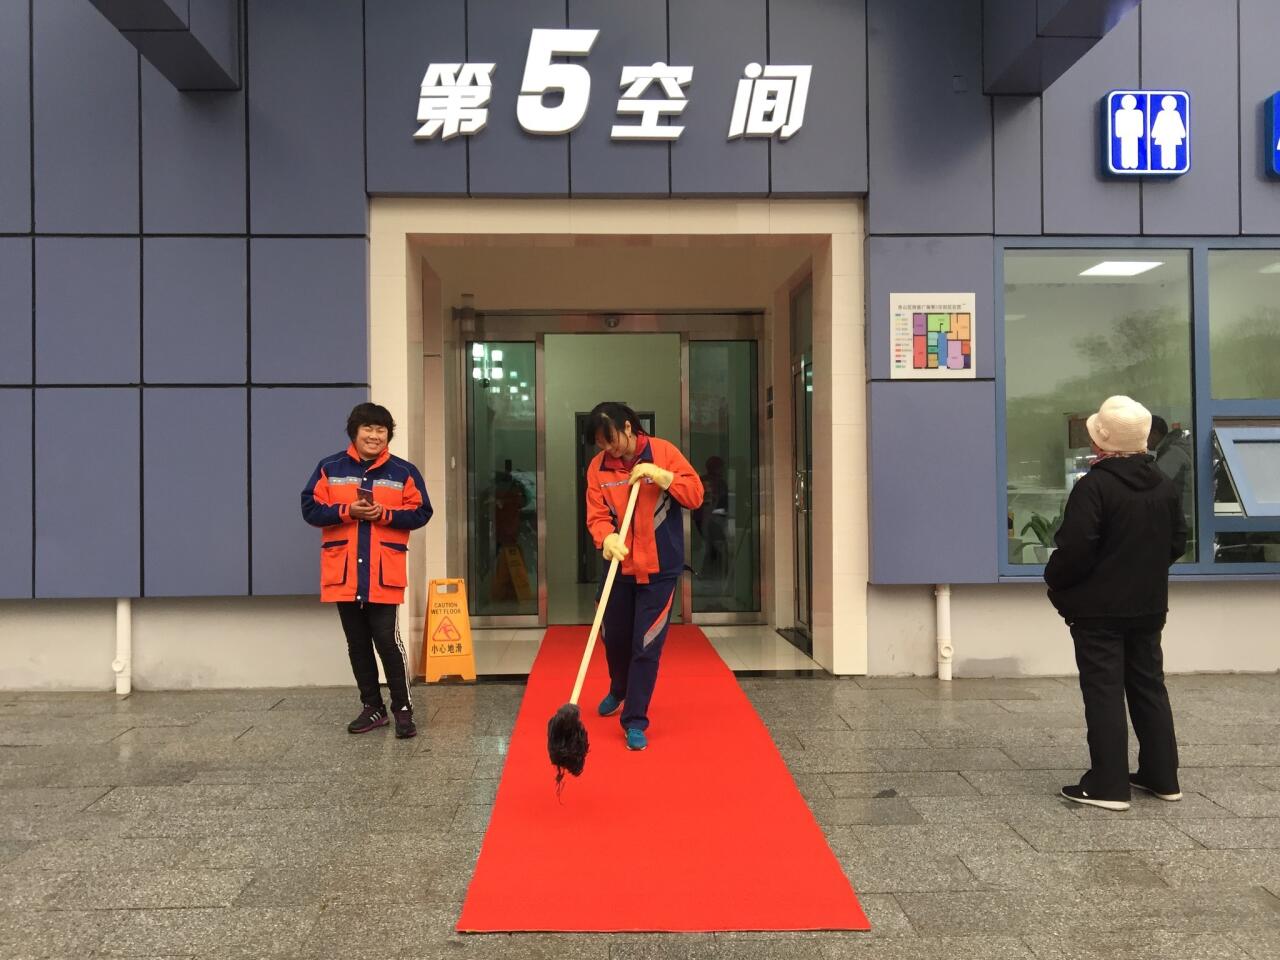 Workers sweep the red carpet at the new "5th Space" public restroom in Beijing.